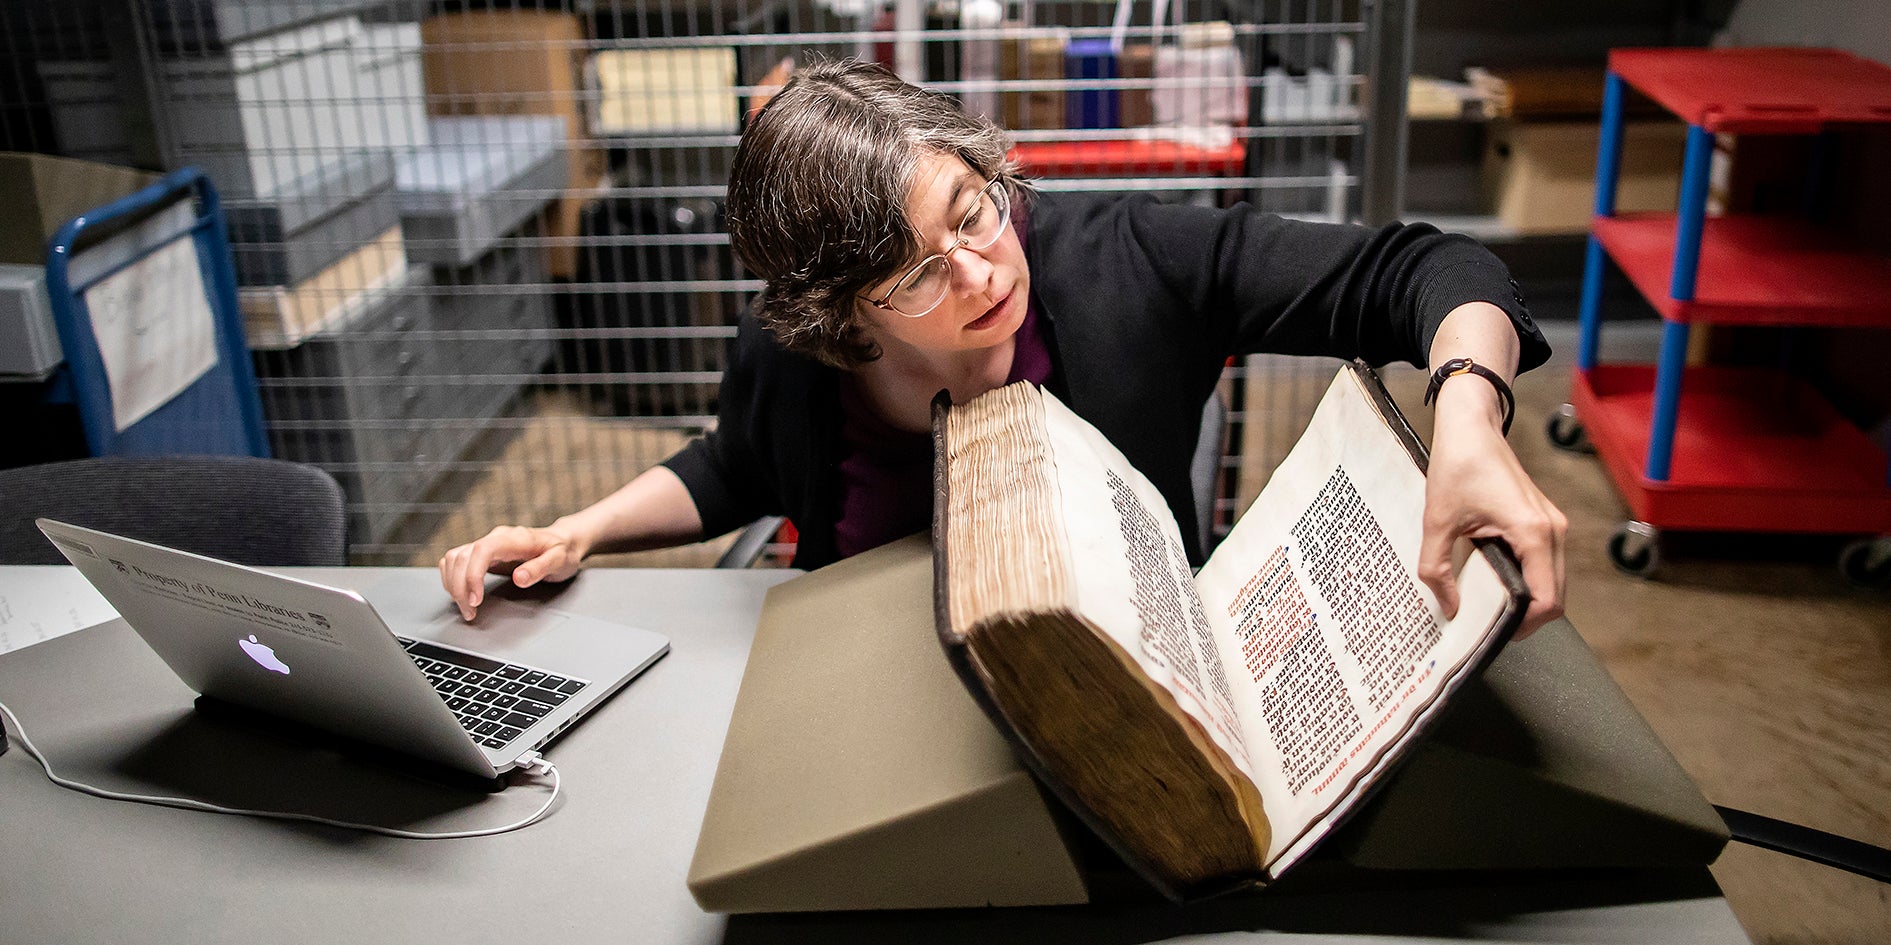 Woman with laptop examining large book